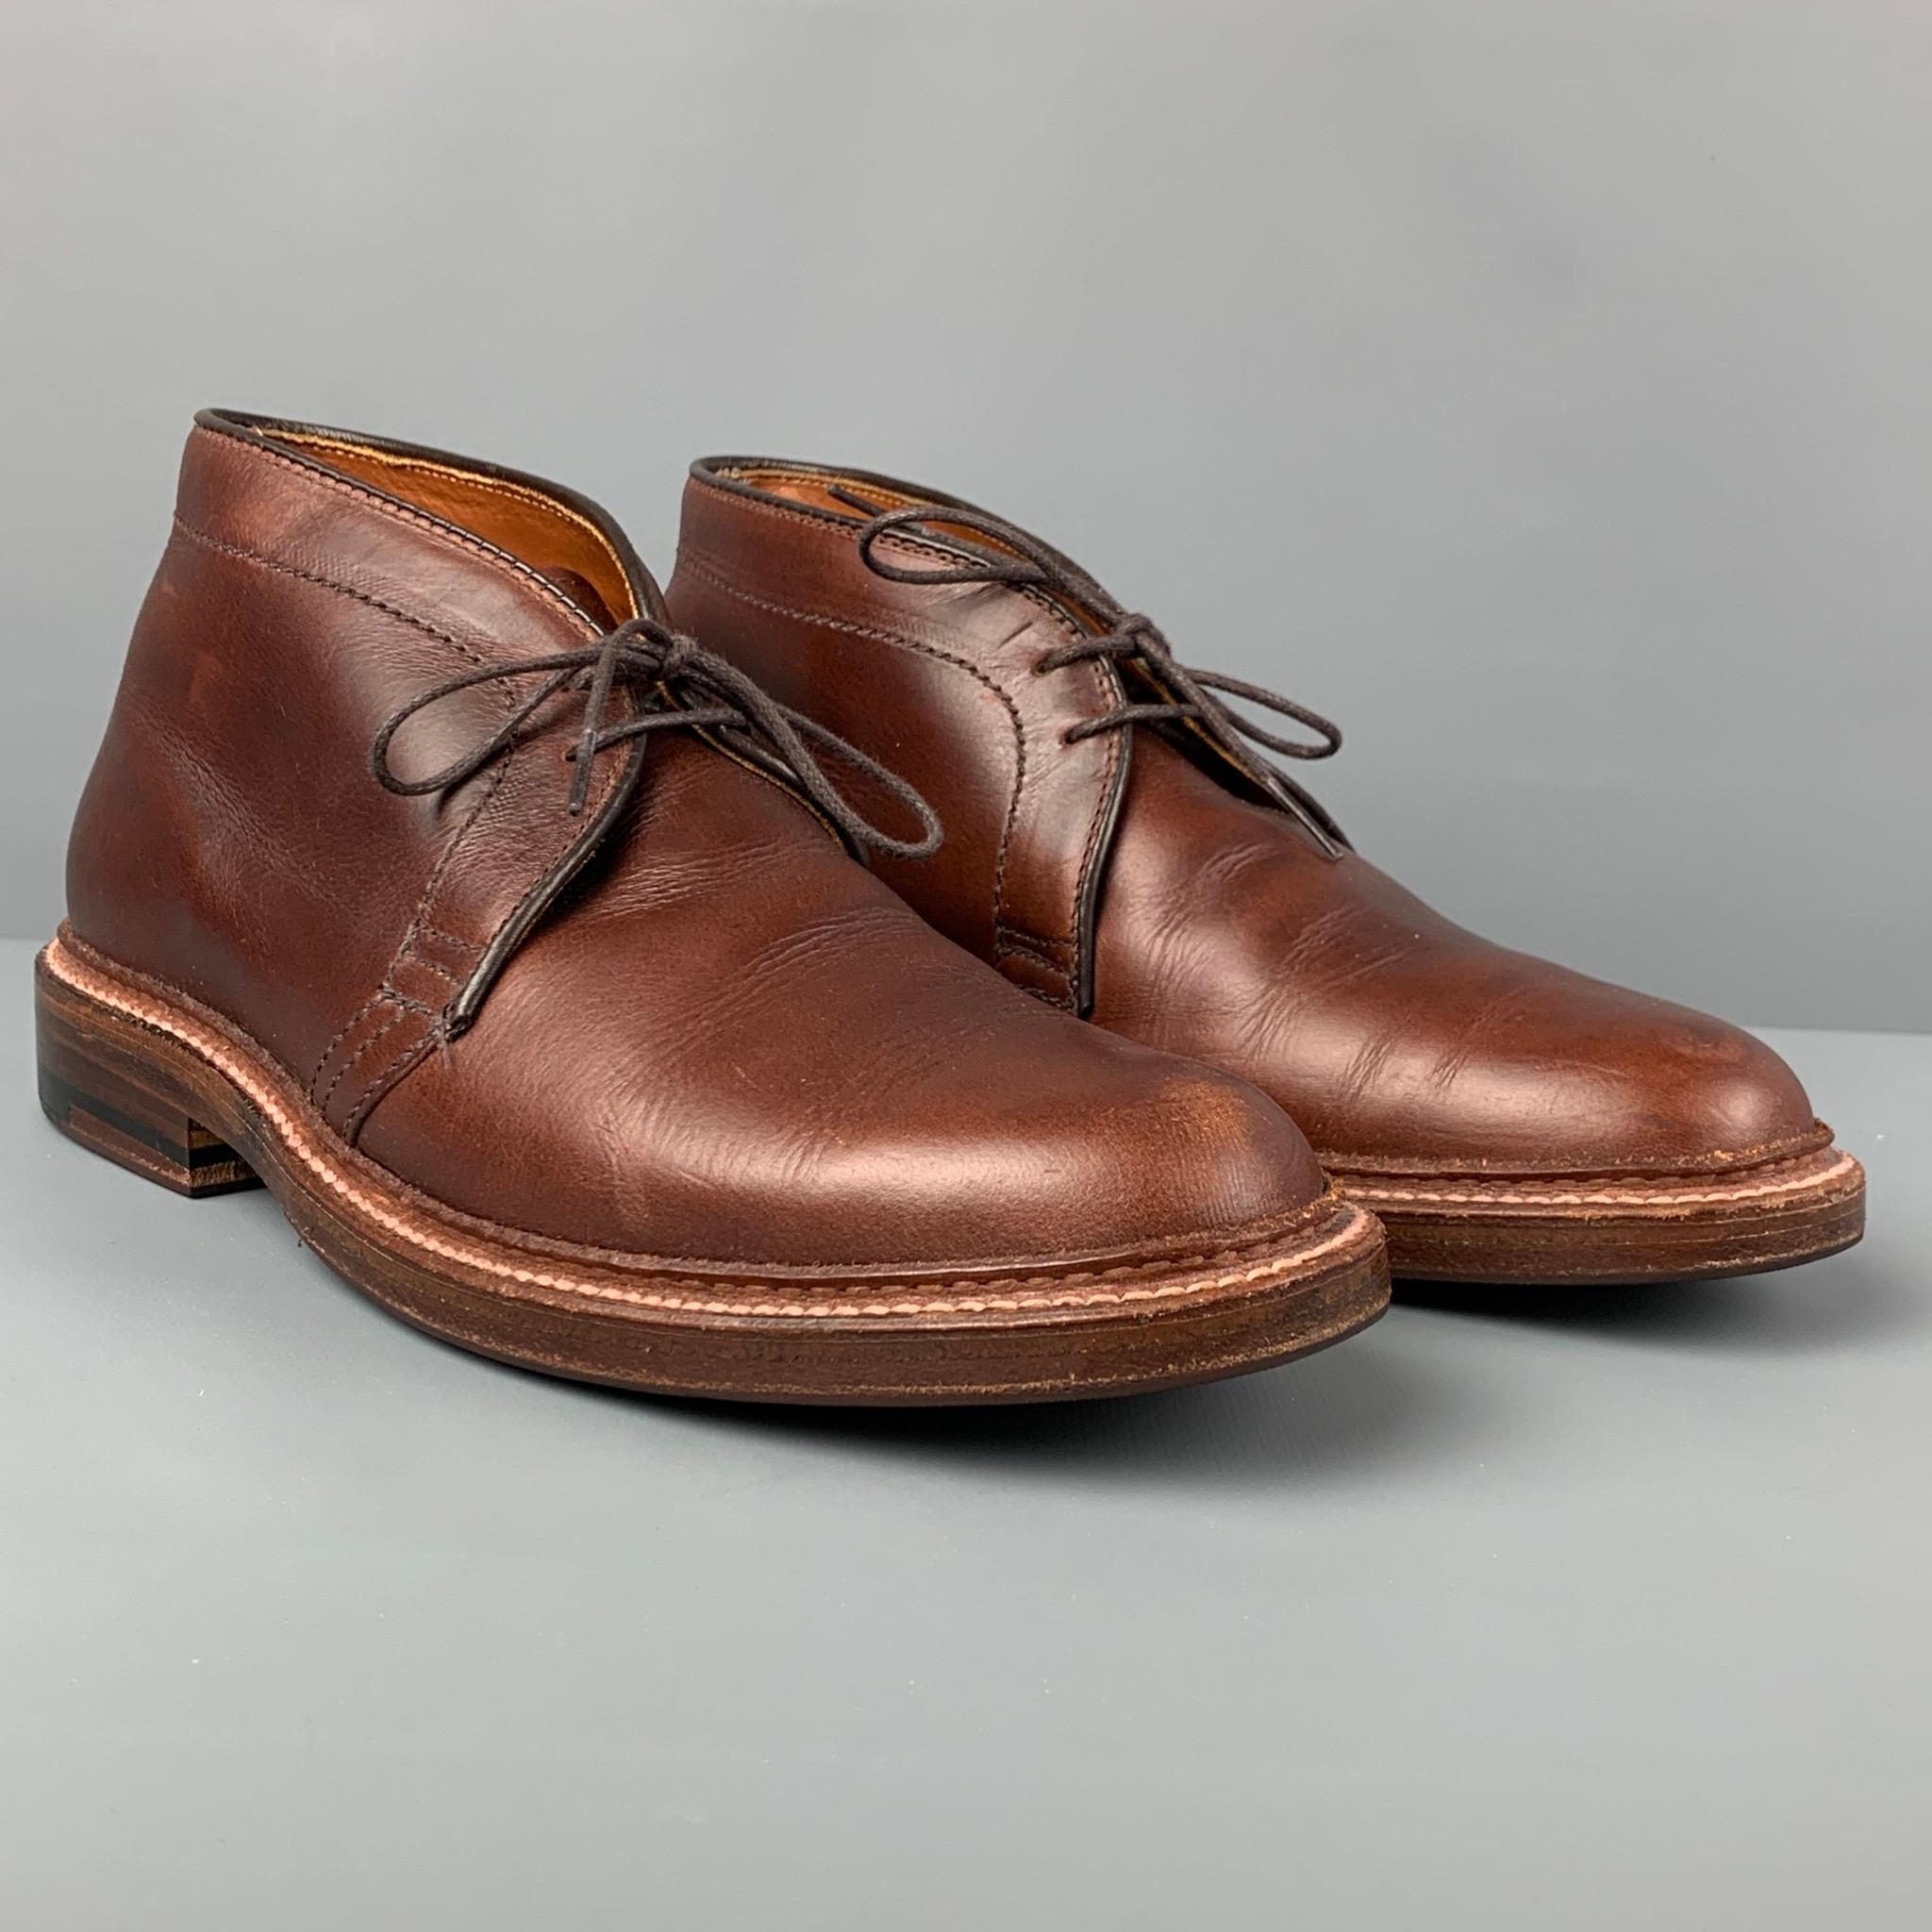 ALDEN boots comes in a brown leather featuring a chukka style and a lace up closure. Comes with box and shoe trees. Made in USA. 

Very Good Pre-Owned Condition.
Marked: 6.5 B/D 0B03 026 13781

Measurements:

Length: 11.5 in.
Width: 4 in.
Height: 4